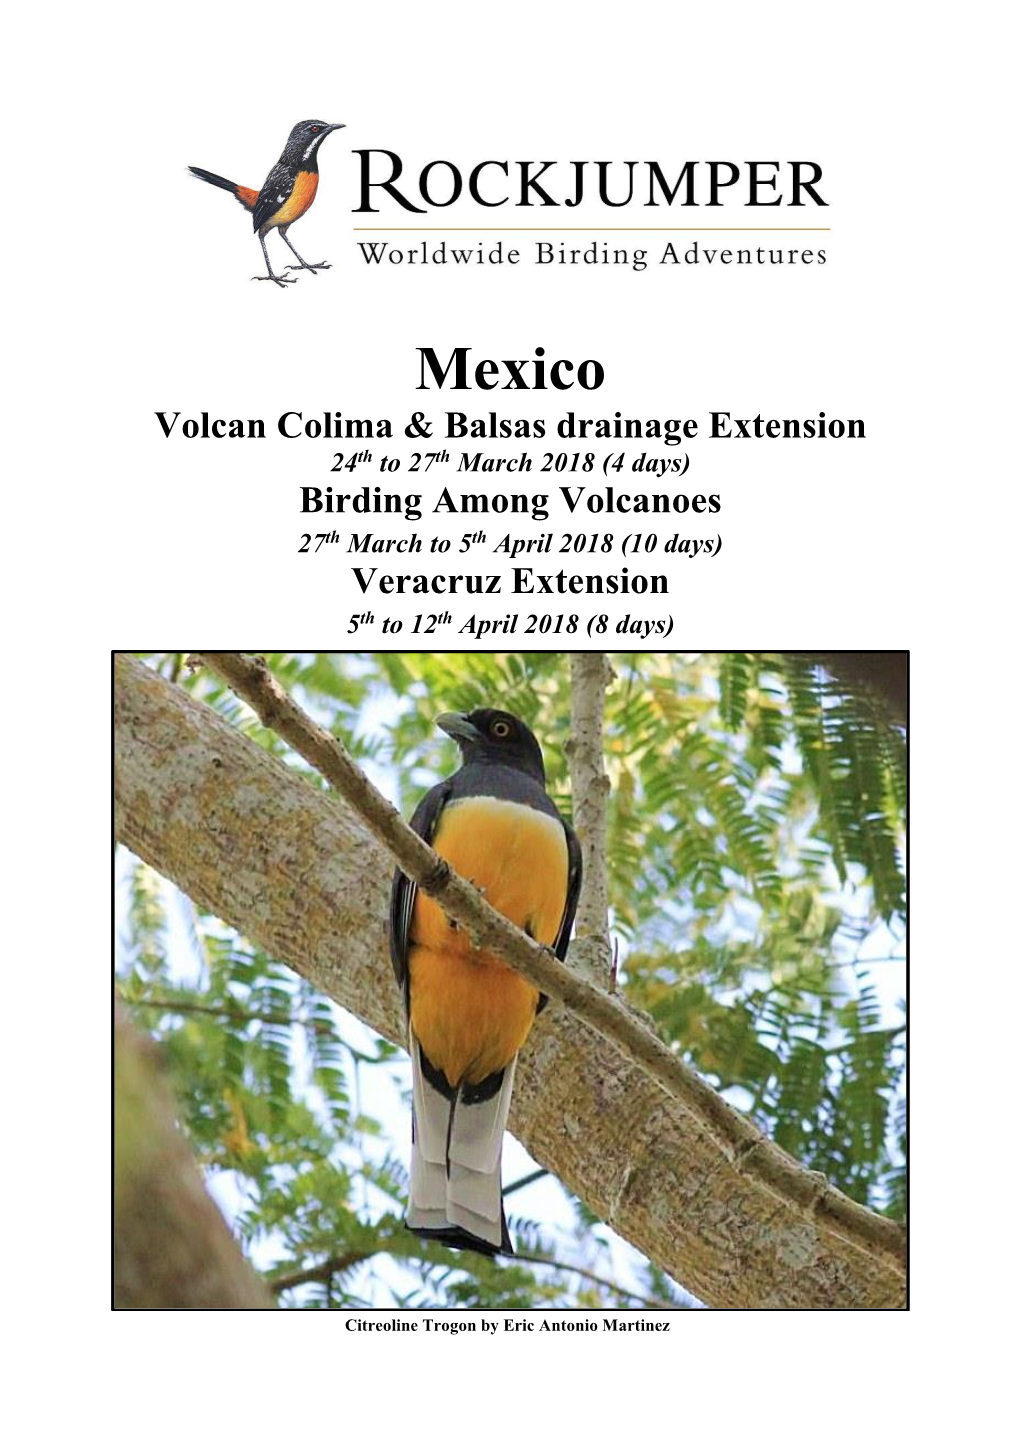 Mexico Volcan Colima & Balsas Drainage Extension 24Th to 27Th March 2018 (4 Days) Birding Among Volcanoes